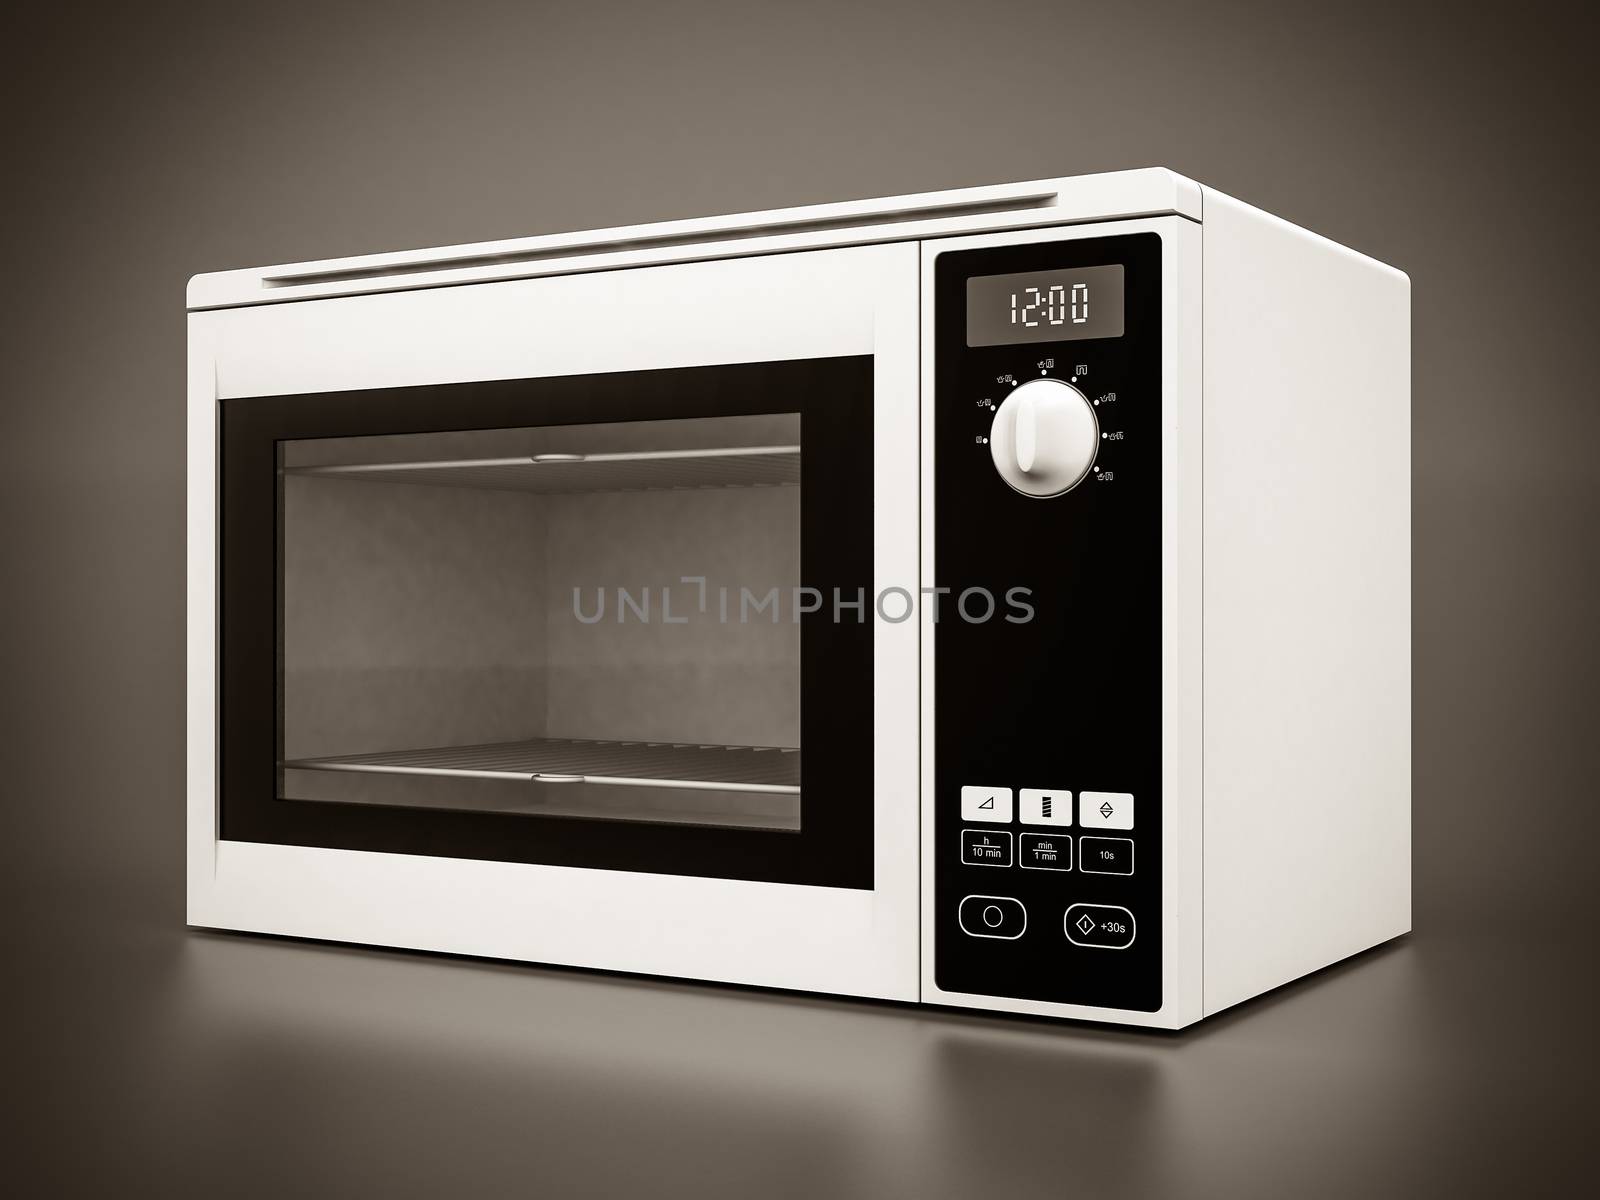 Image of the microwave oven on a gray background